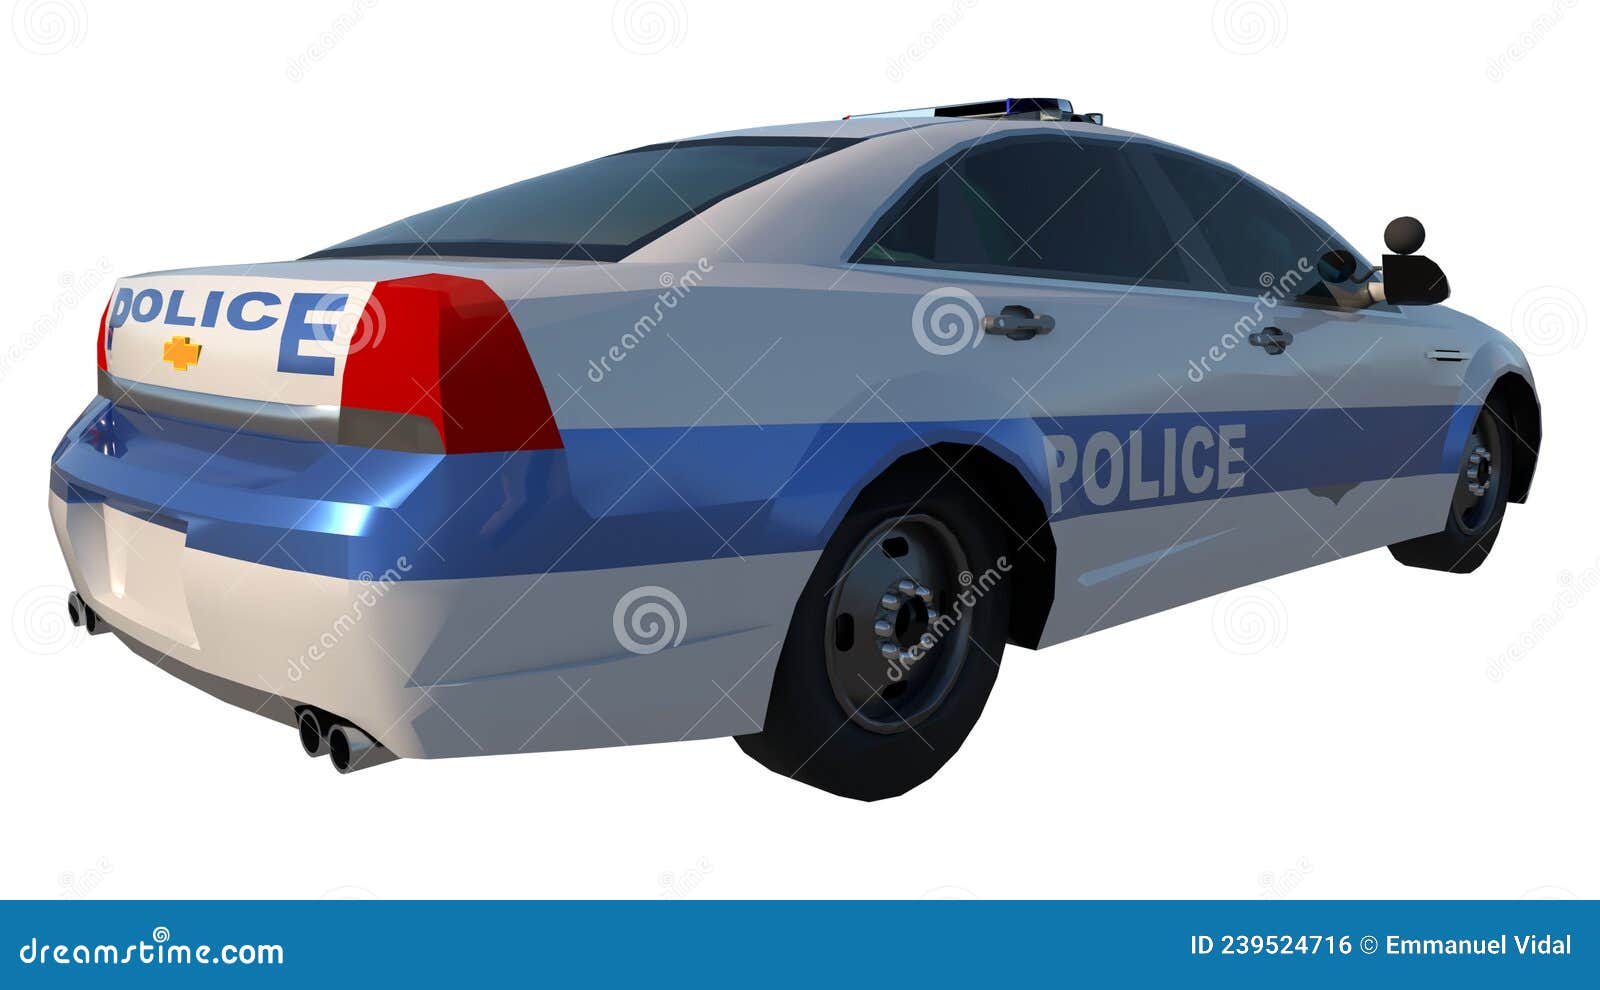 police patrol 1-perspective b view white background 3d rendering ilustracion 3d